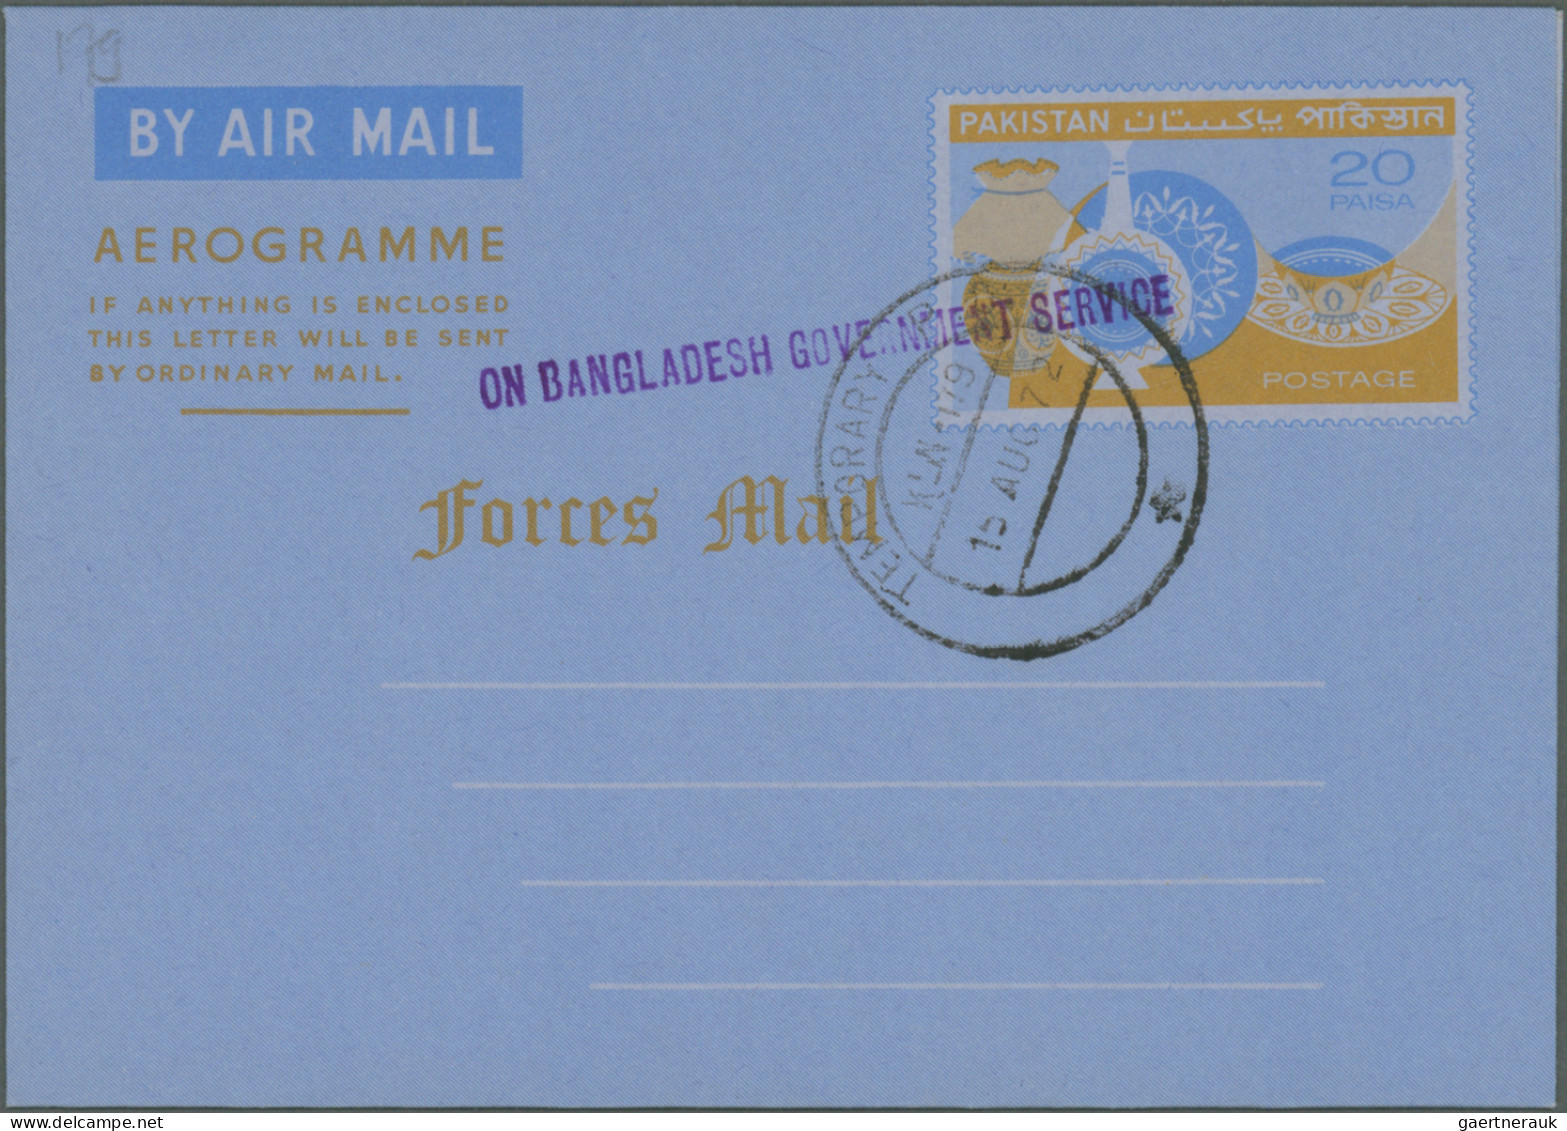 Bangladesch - postal stationery: 1972/1992, comprehensive collection of apprx. 8